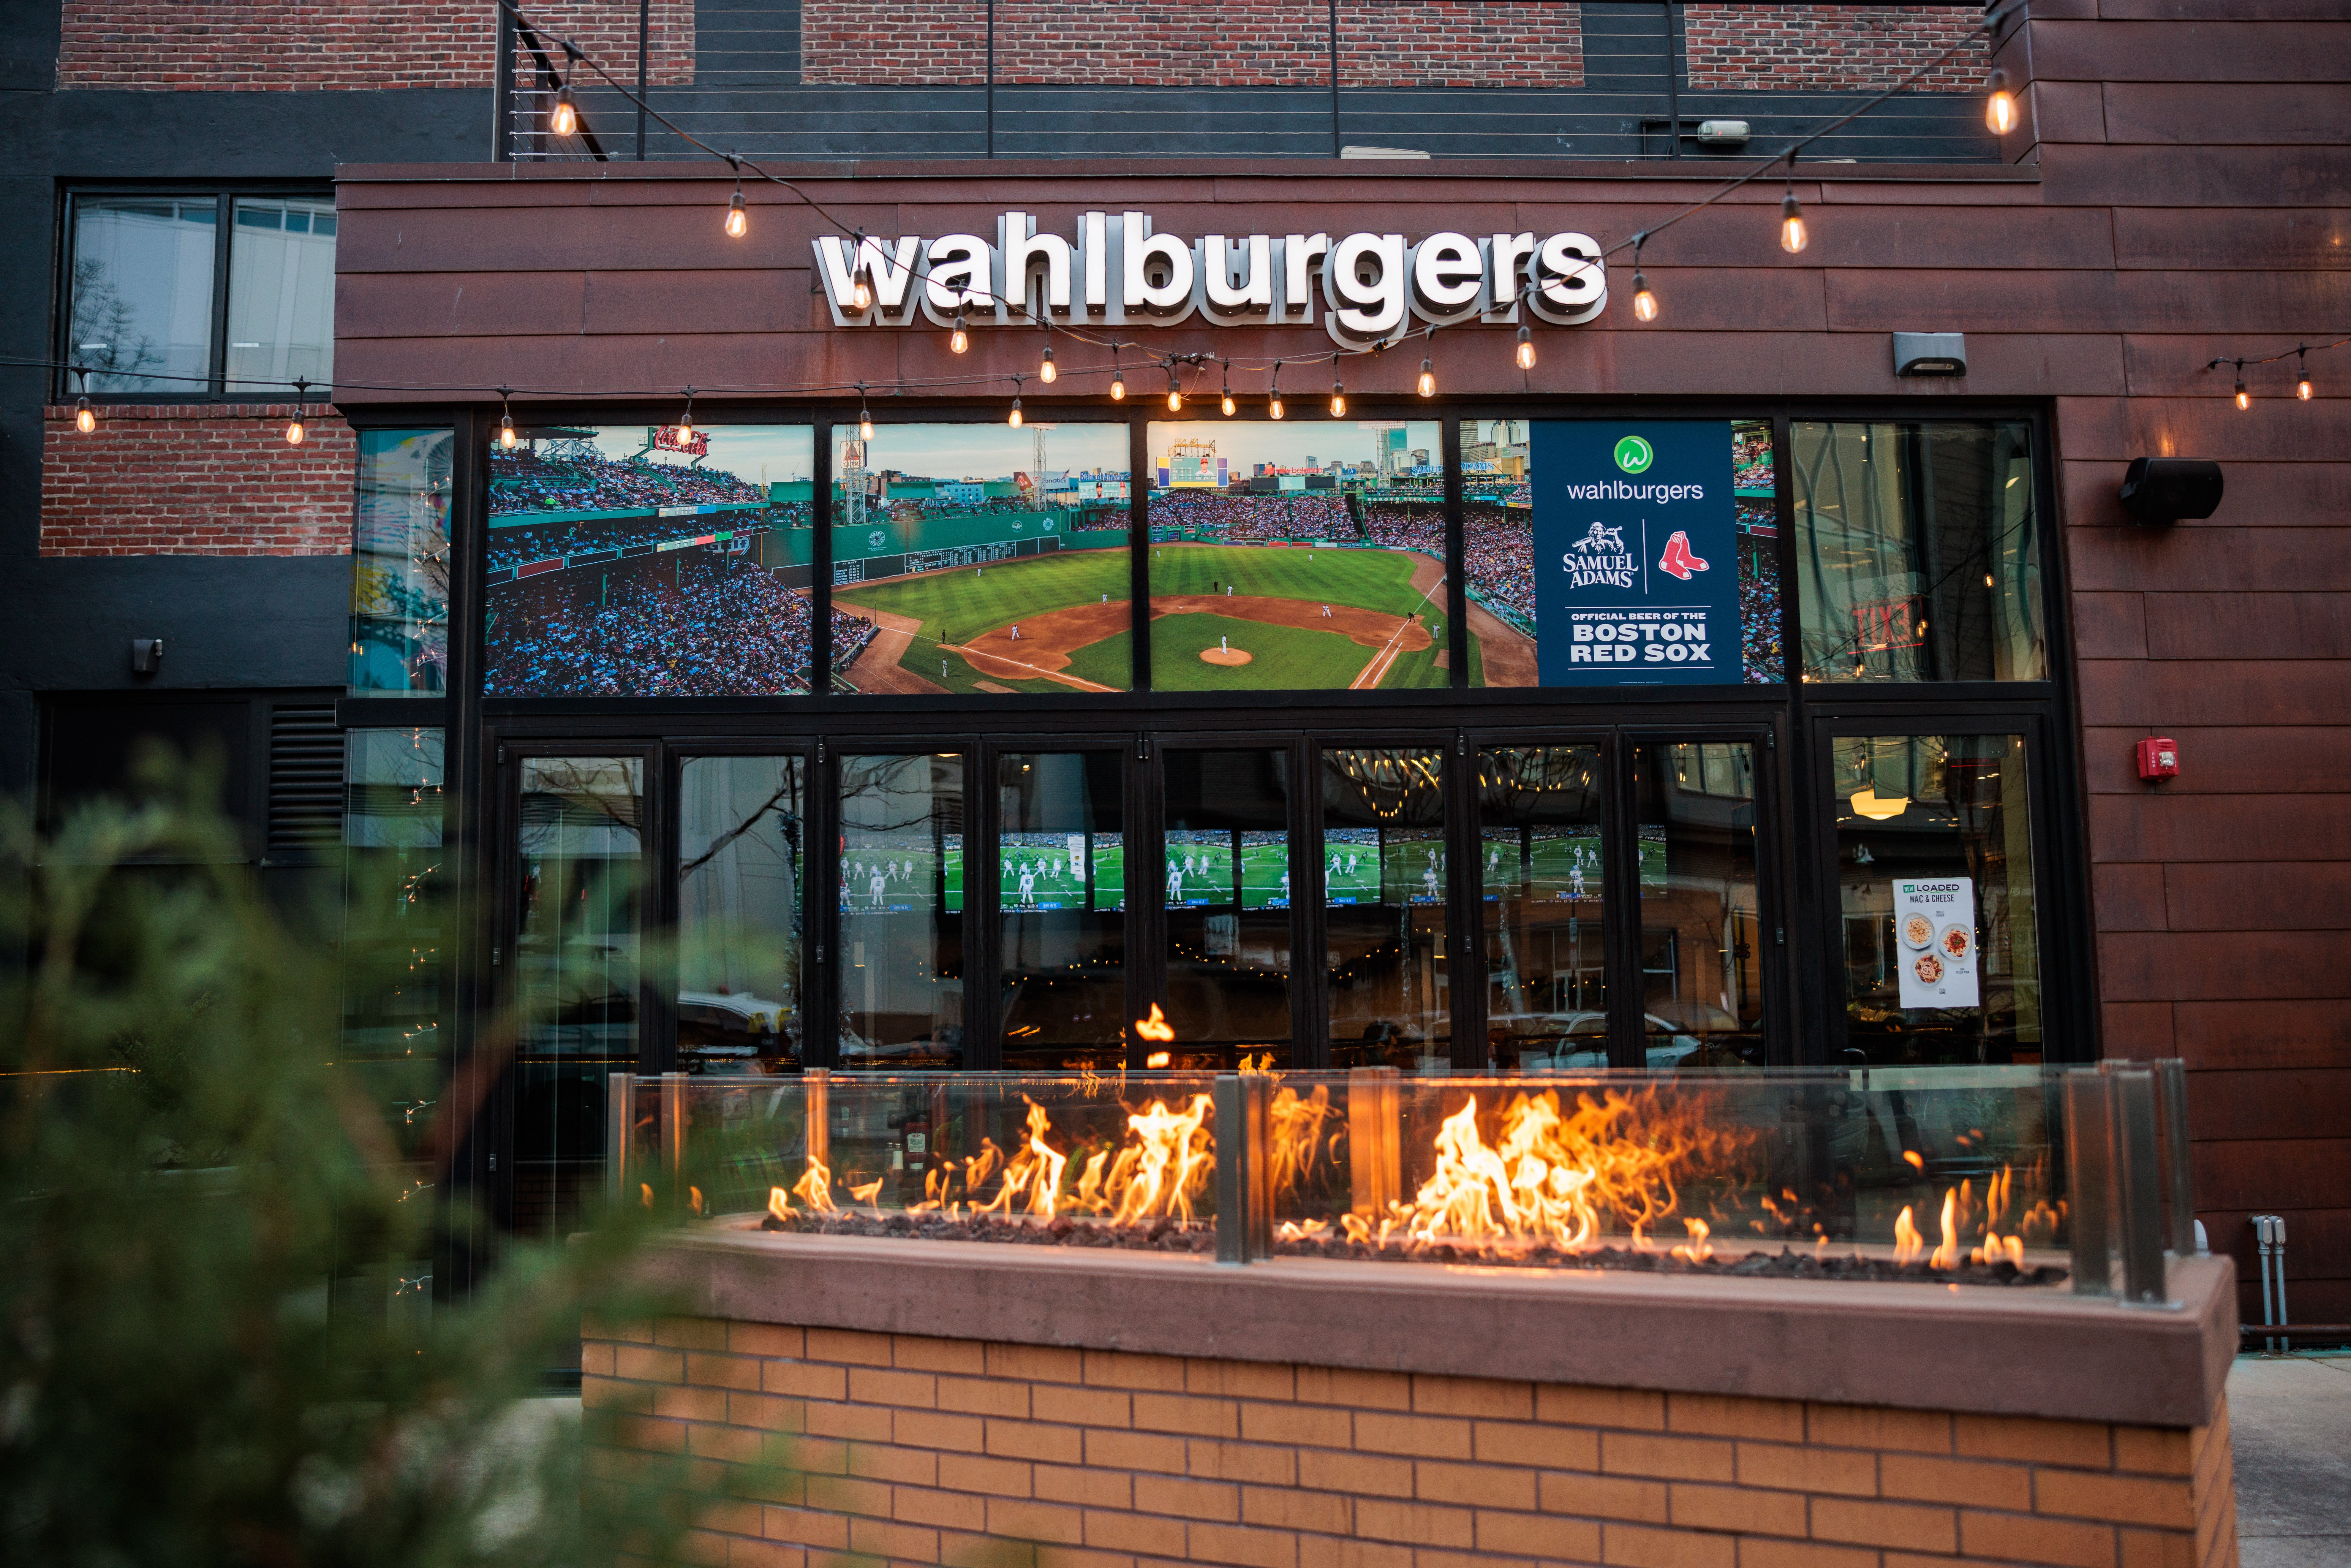 An exterior of the Wahlburgers restaurant showing an inviting outdoor fire pit; inside of the space shows many TV screens displaying the Red Sox game.